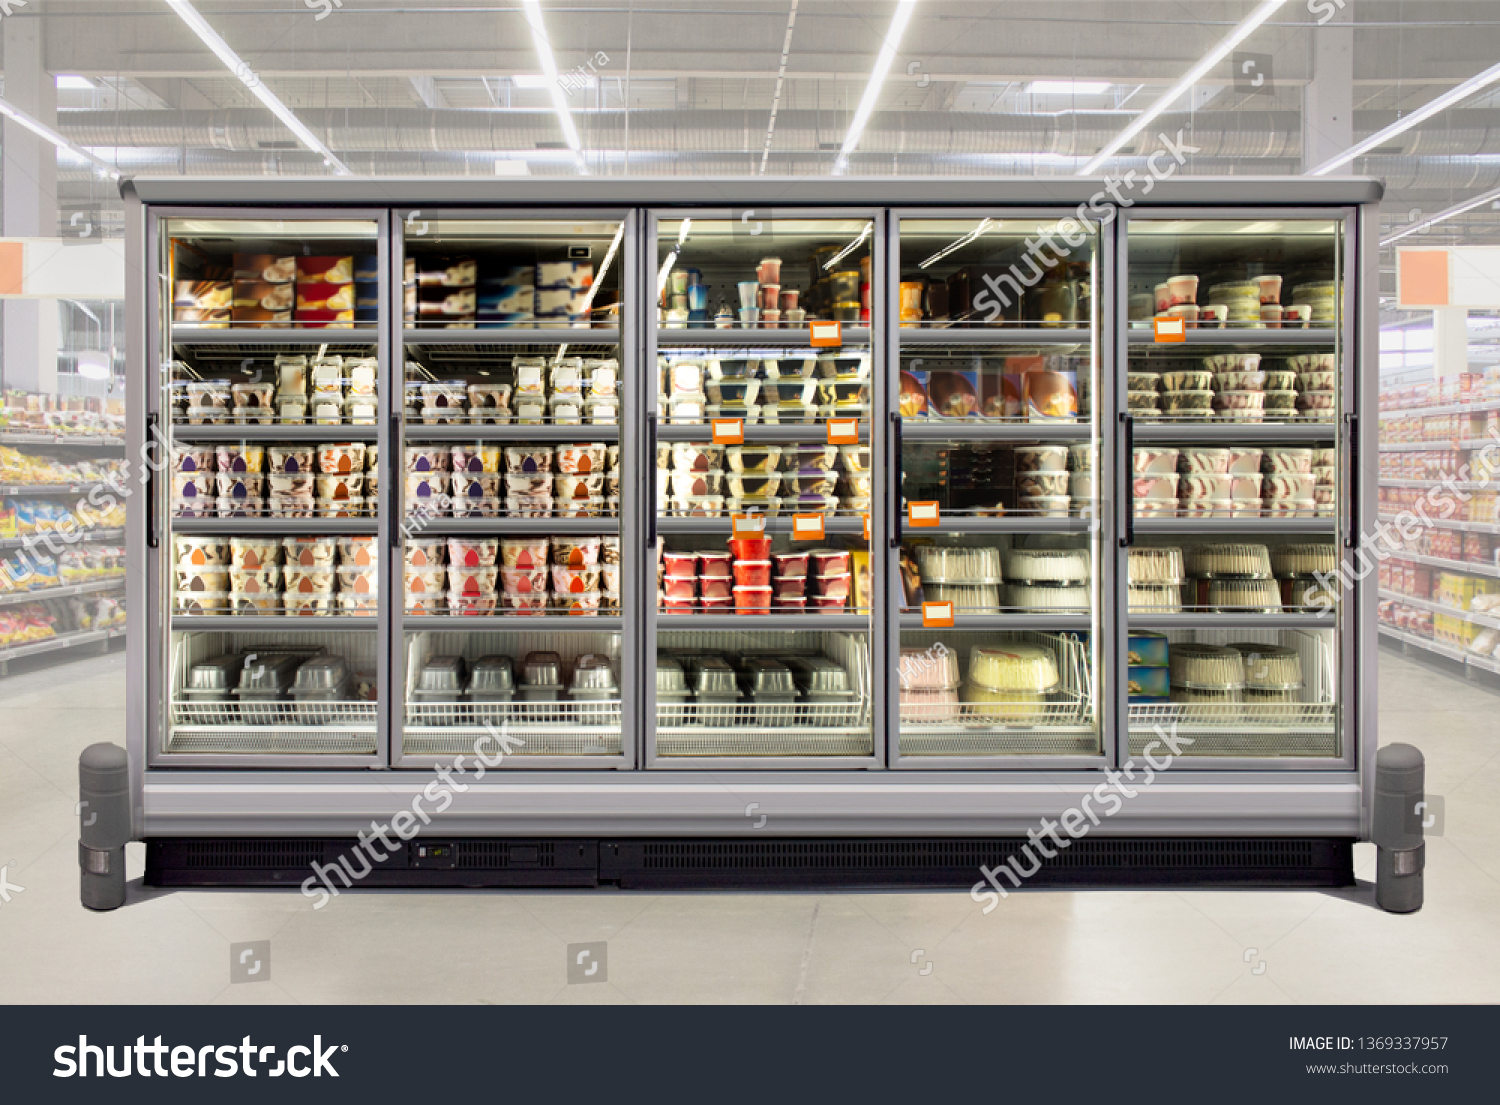 Ice cream and birthday cakes in a glass door freezer at supermarket. Suitable for presenting new packaging among many others. Front view. #1369337957